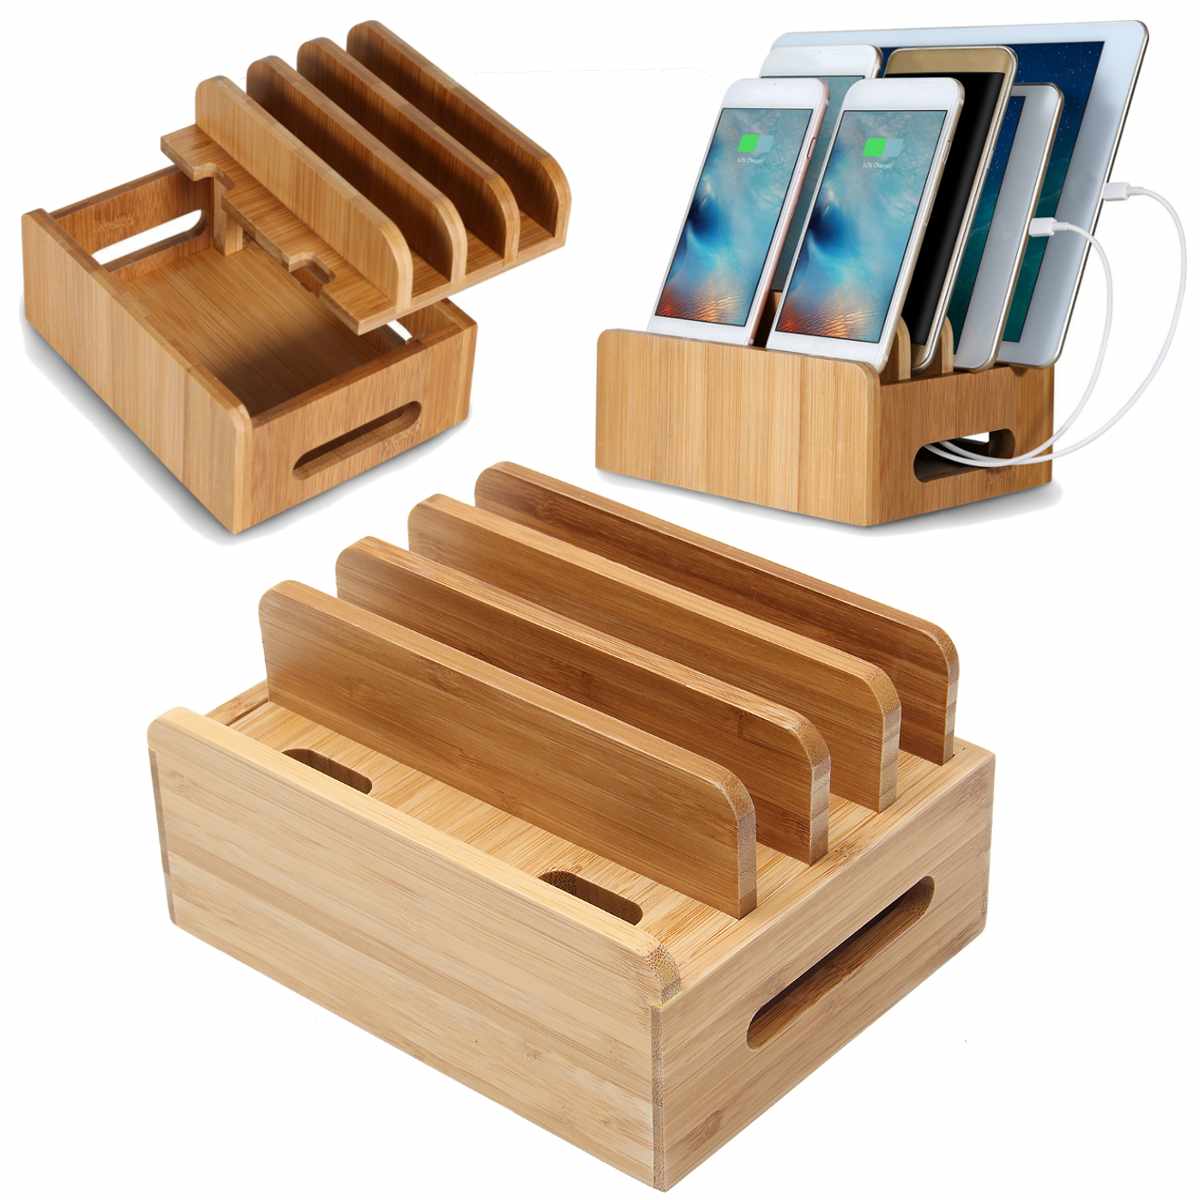 Bamboo Charging Station Dock Desktop Docking Station Multi Devices Cords Cable Organizer for iPhone 12 iPhone 12 Pro iPhone11 Pro Max XS XR X Max Samsung S10 iPad Charger Not Included